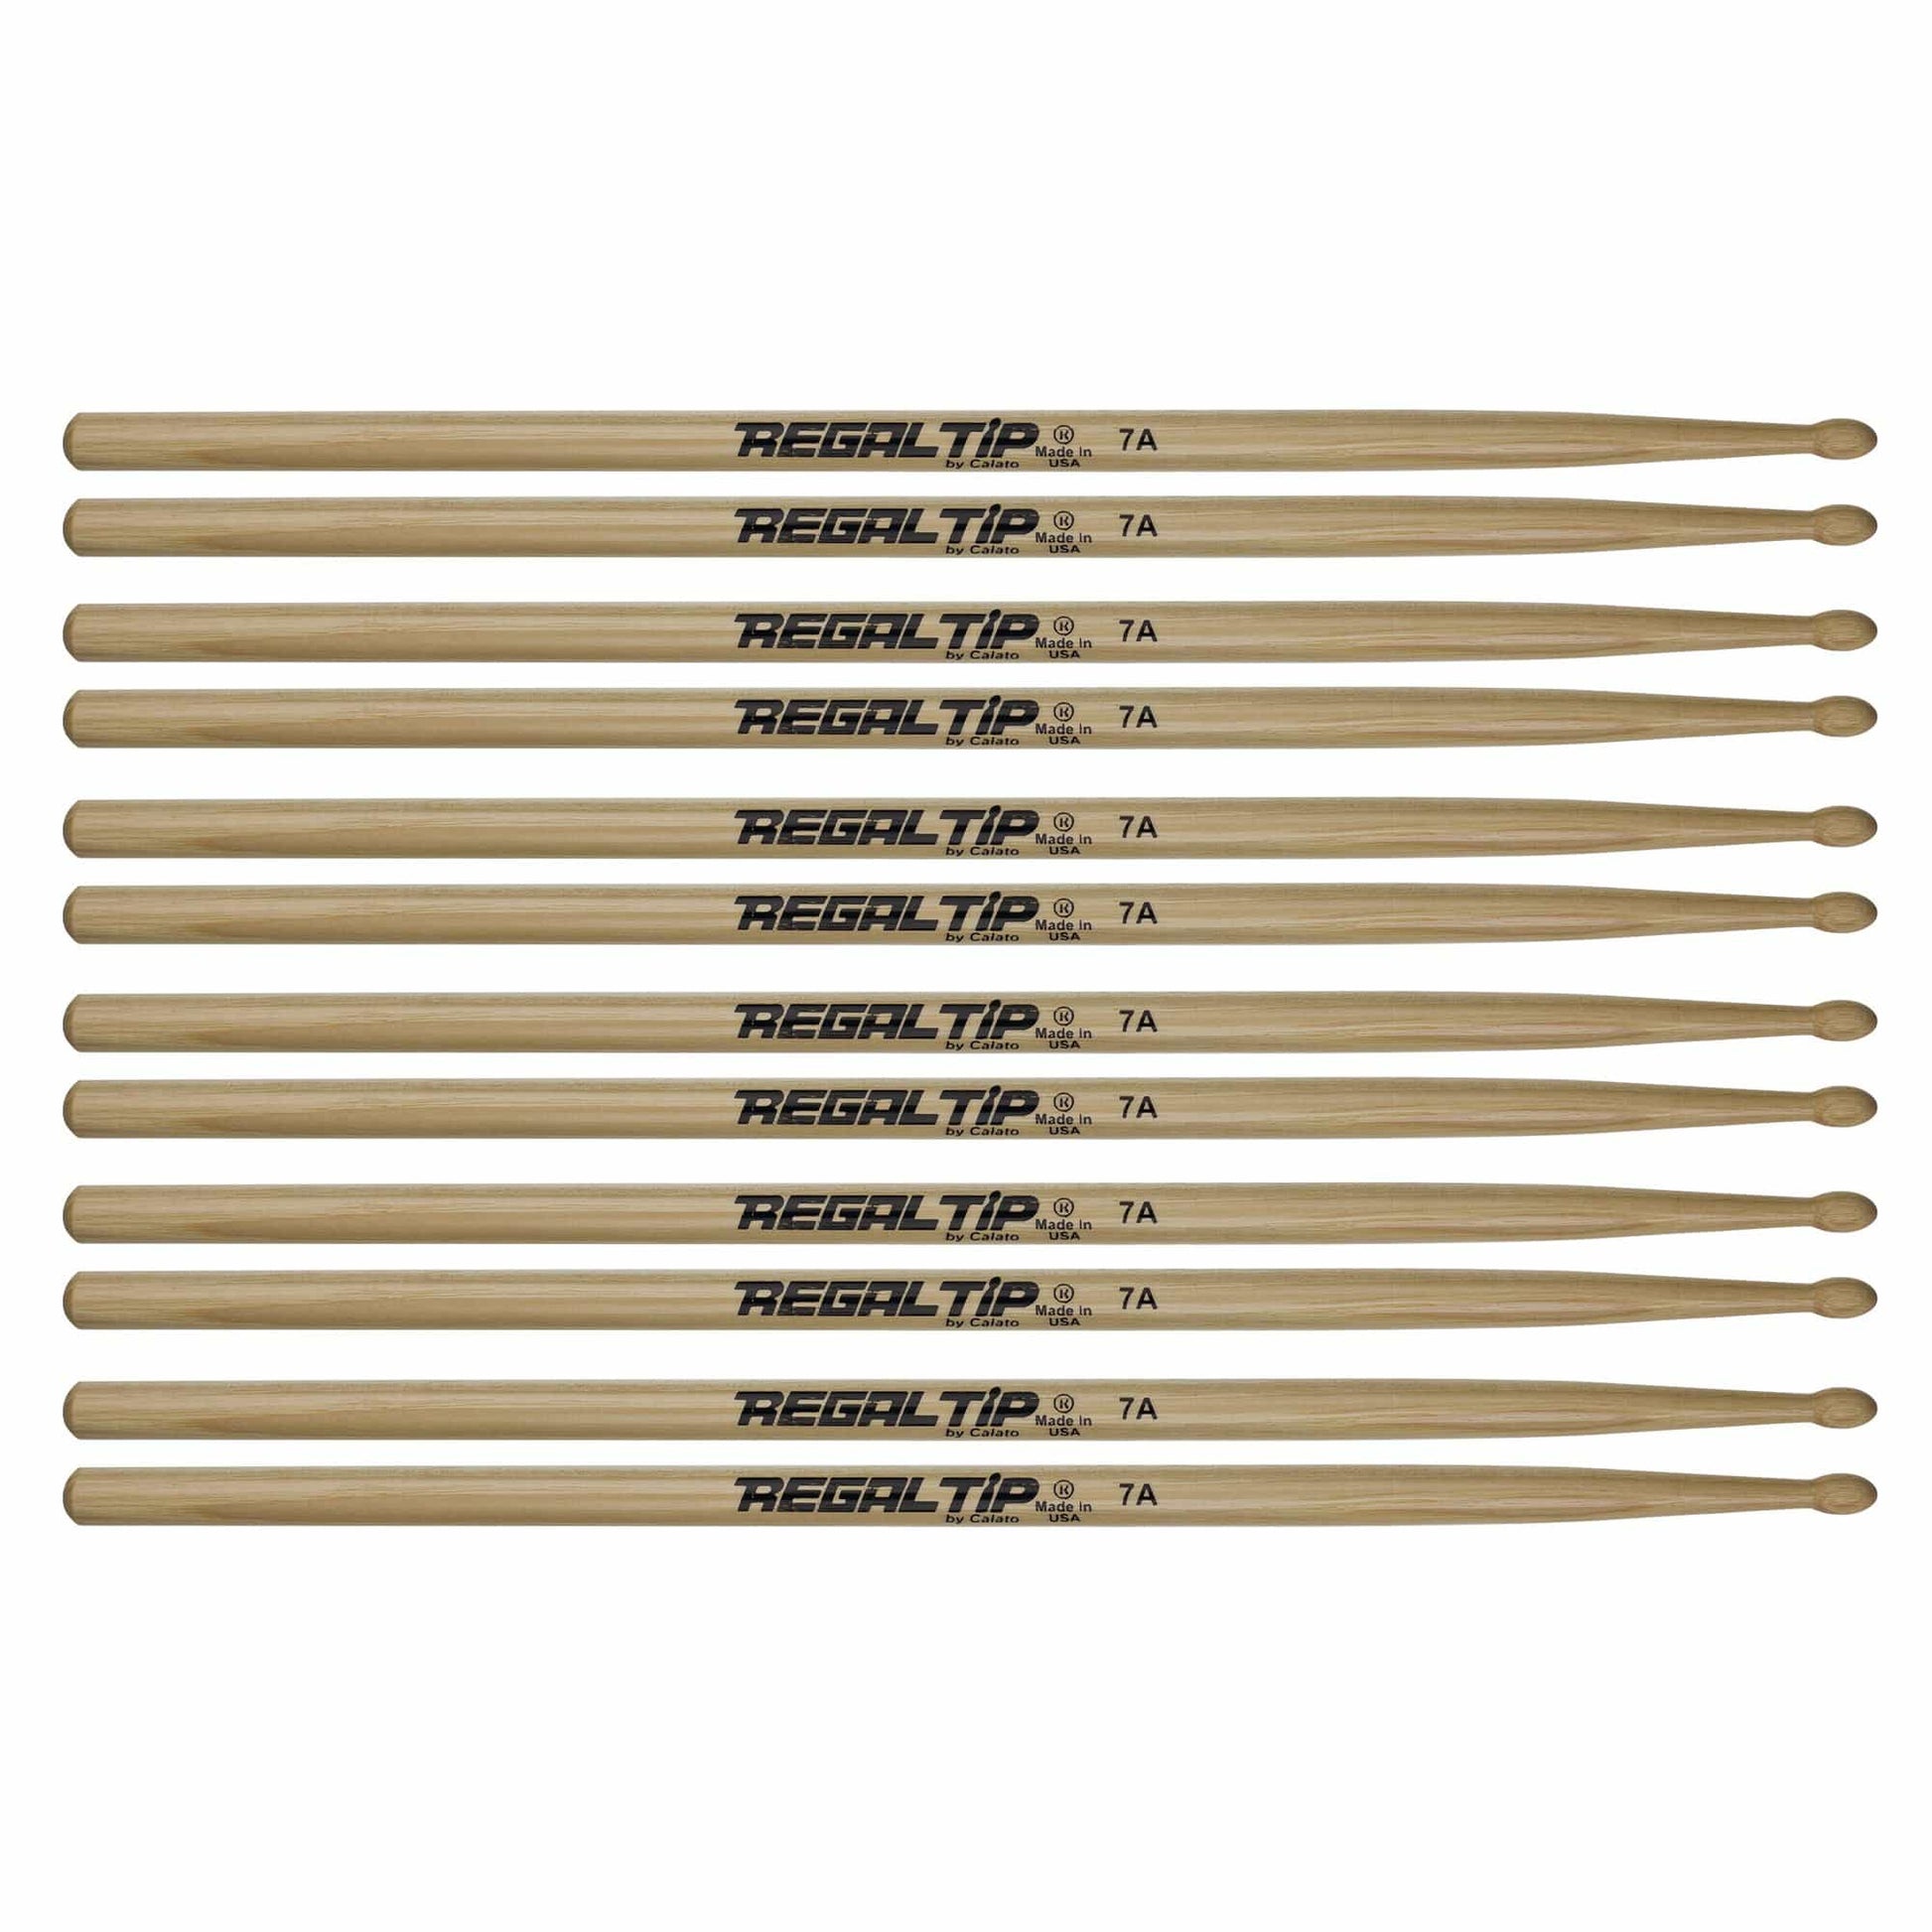 Regal Tip 7A American Hickory Wood Tip Drum Sticks (6 Pair Bundle) Drums and Percussion / Parts and Accessories / Drum Sticks and Mallets